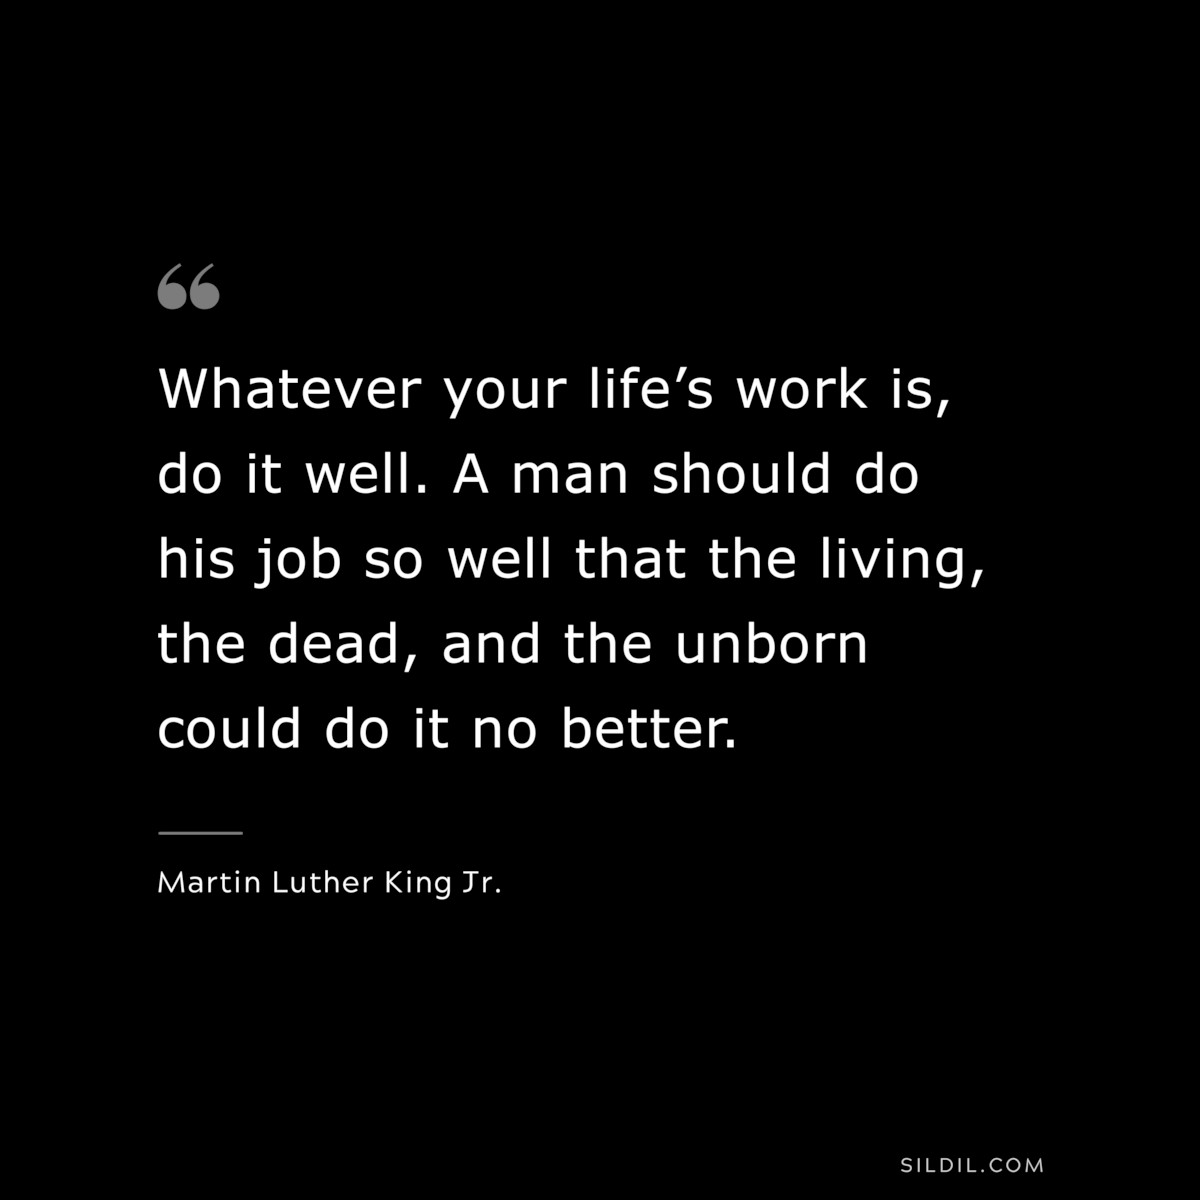 Whatever your life’s work is, do it well. A man should do his job so well that the living, the dead, and the unborn could do it no better. ― Martin Luther King Jr.